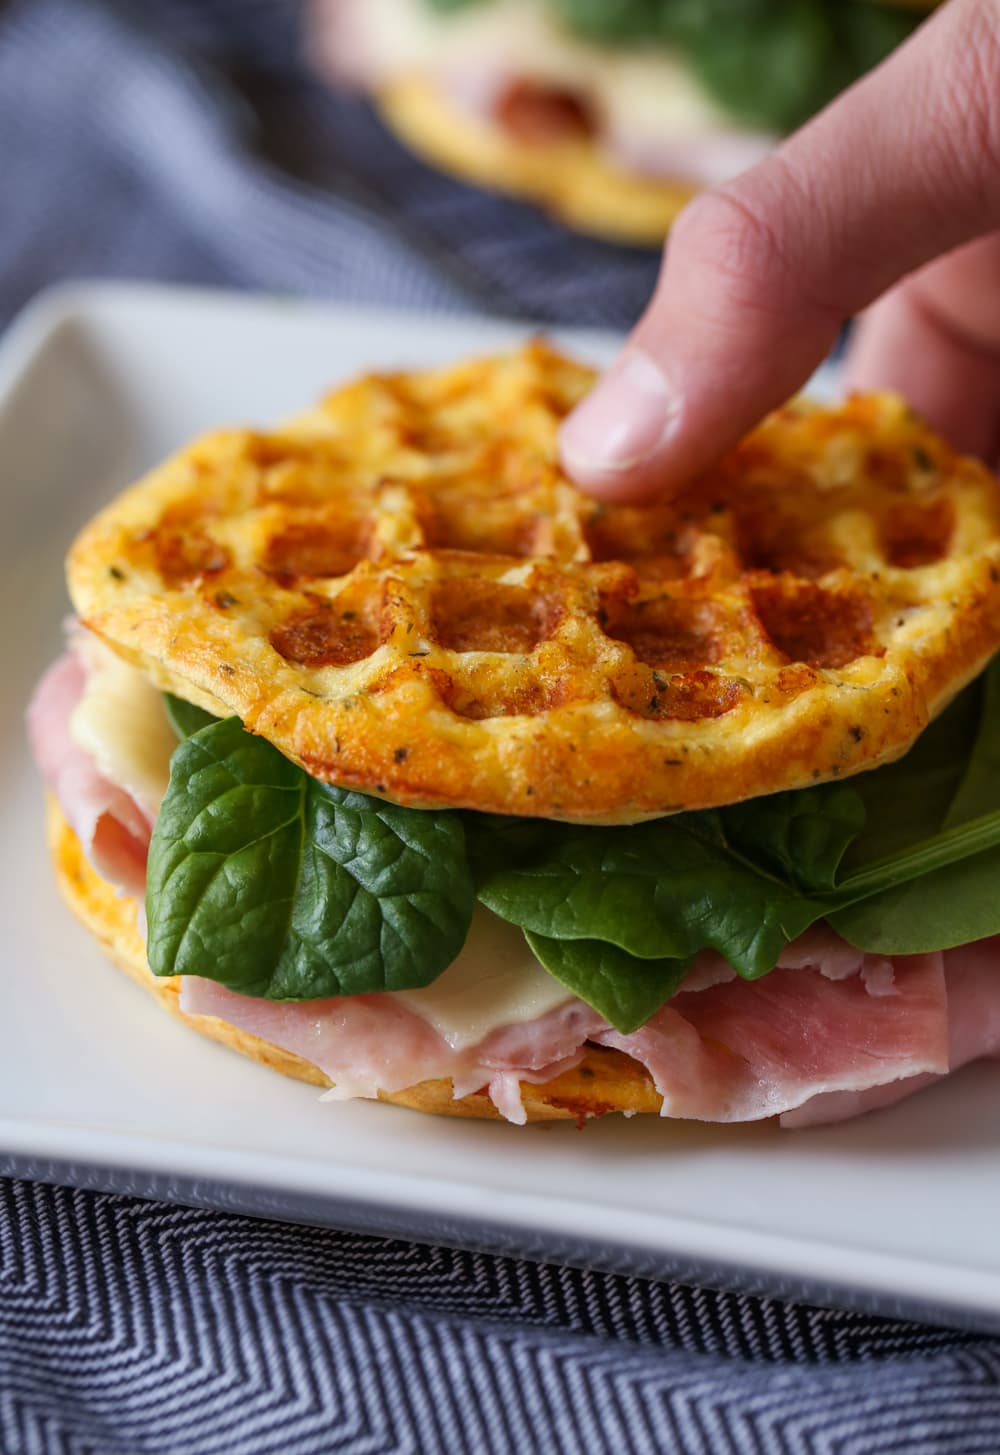 Low Carb Keto Sandwich made with chaffles